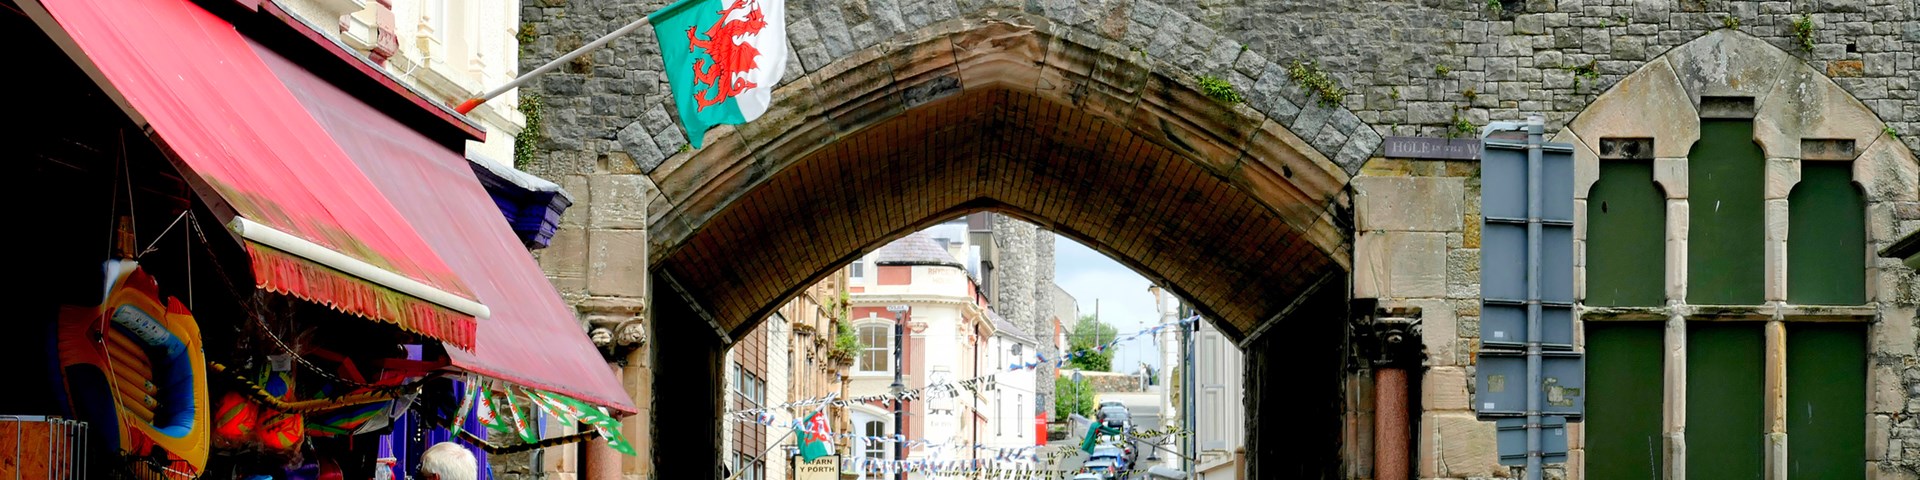 Town centre of Caernarfon in North Wales